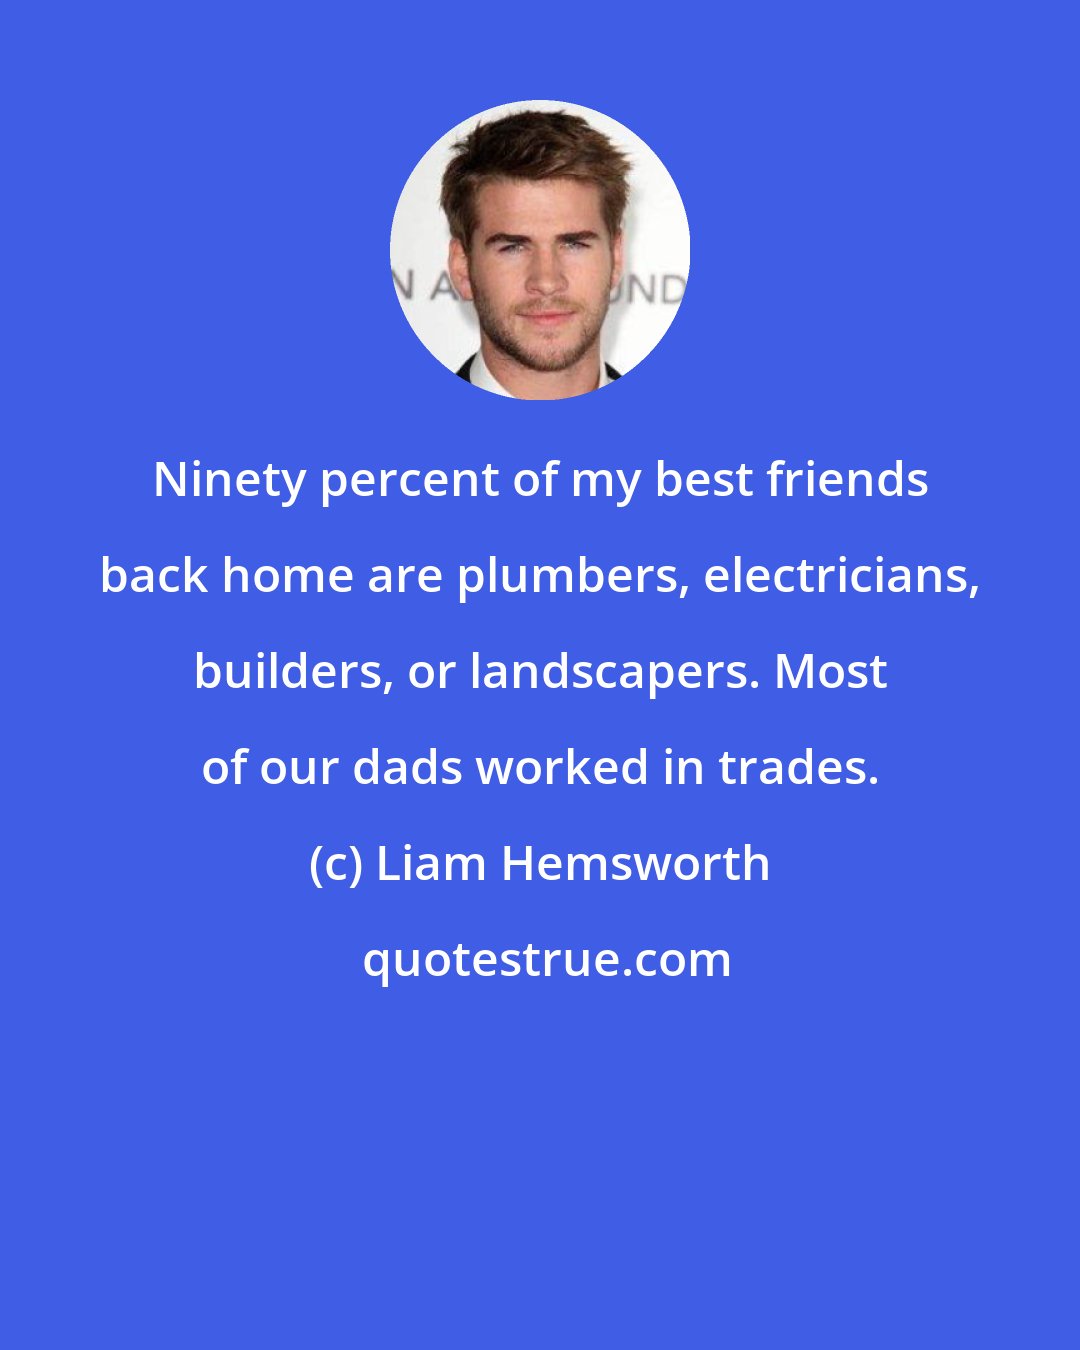 Liam Hemsworth: Ninety percent of my best friends back home are plumbers, electricians, builders, or landscapers. Most of our dads worked in trades.